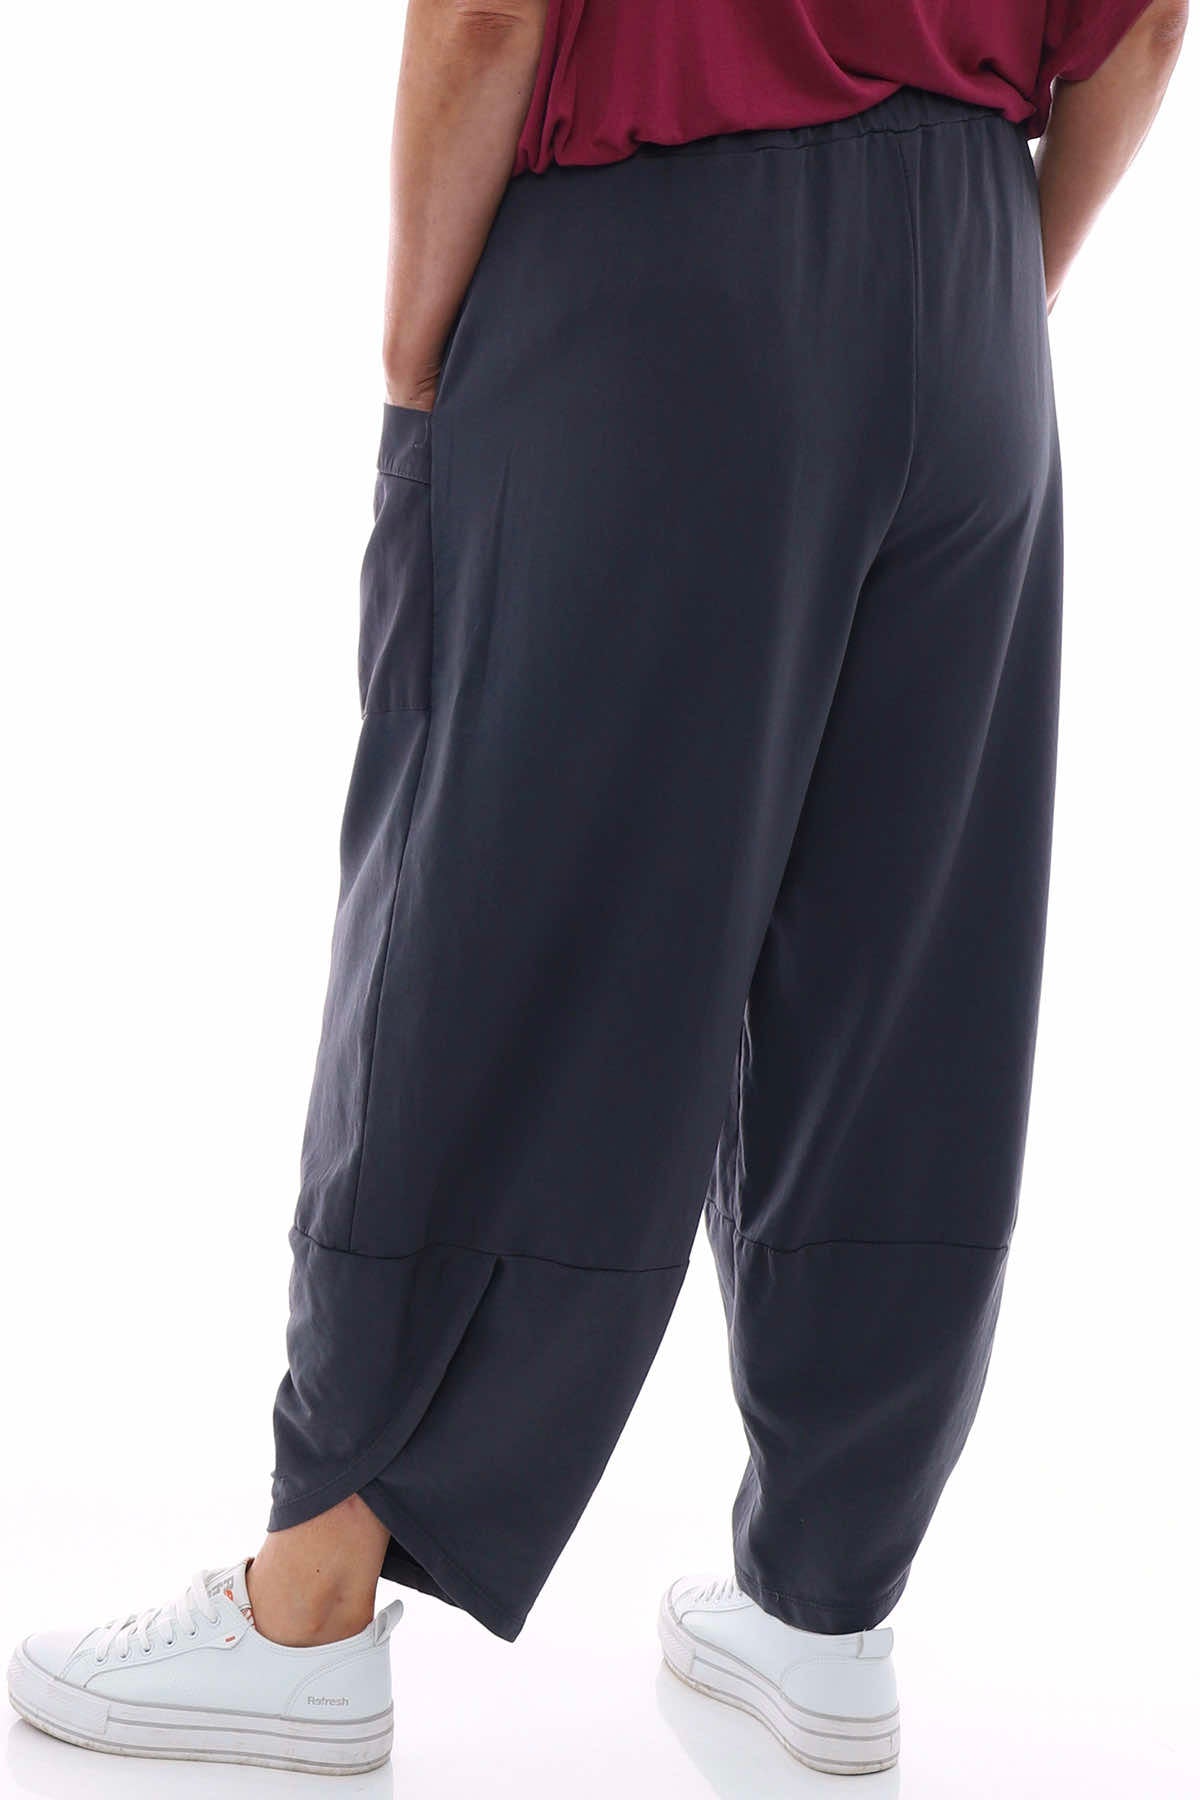 Blanca Pocket Cotton Trousers Charcoal